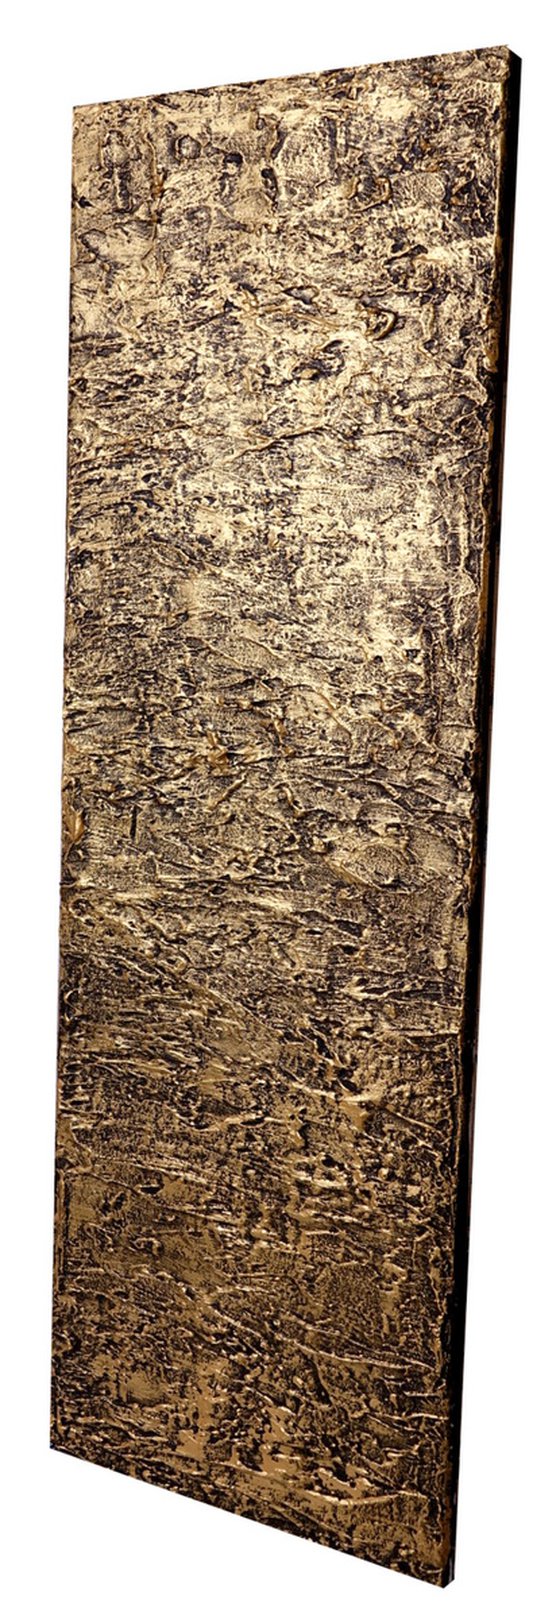 The Golden Monolith 16 x 40 inches for those who like abstract